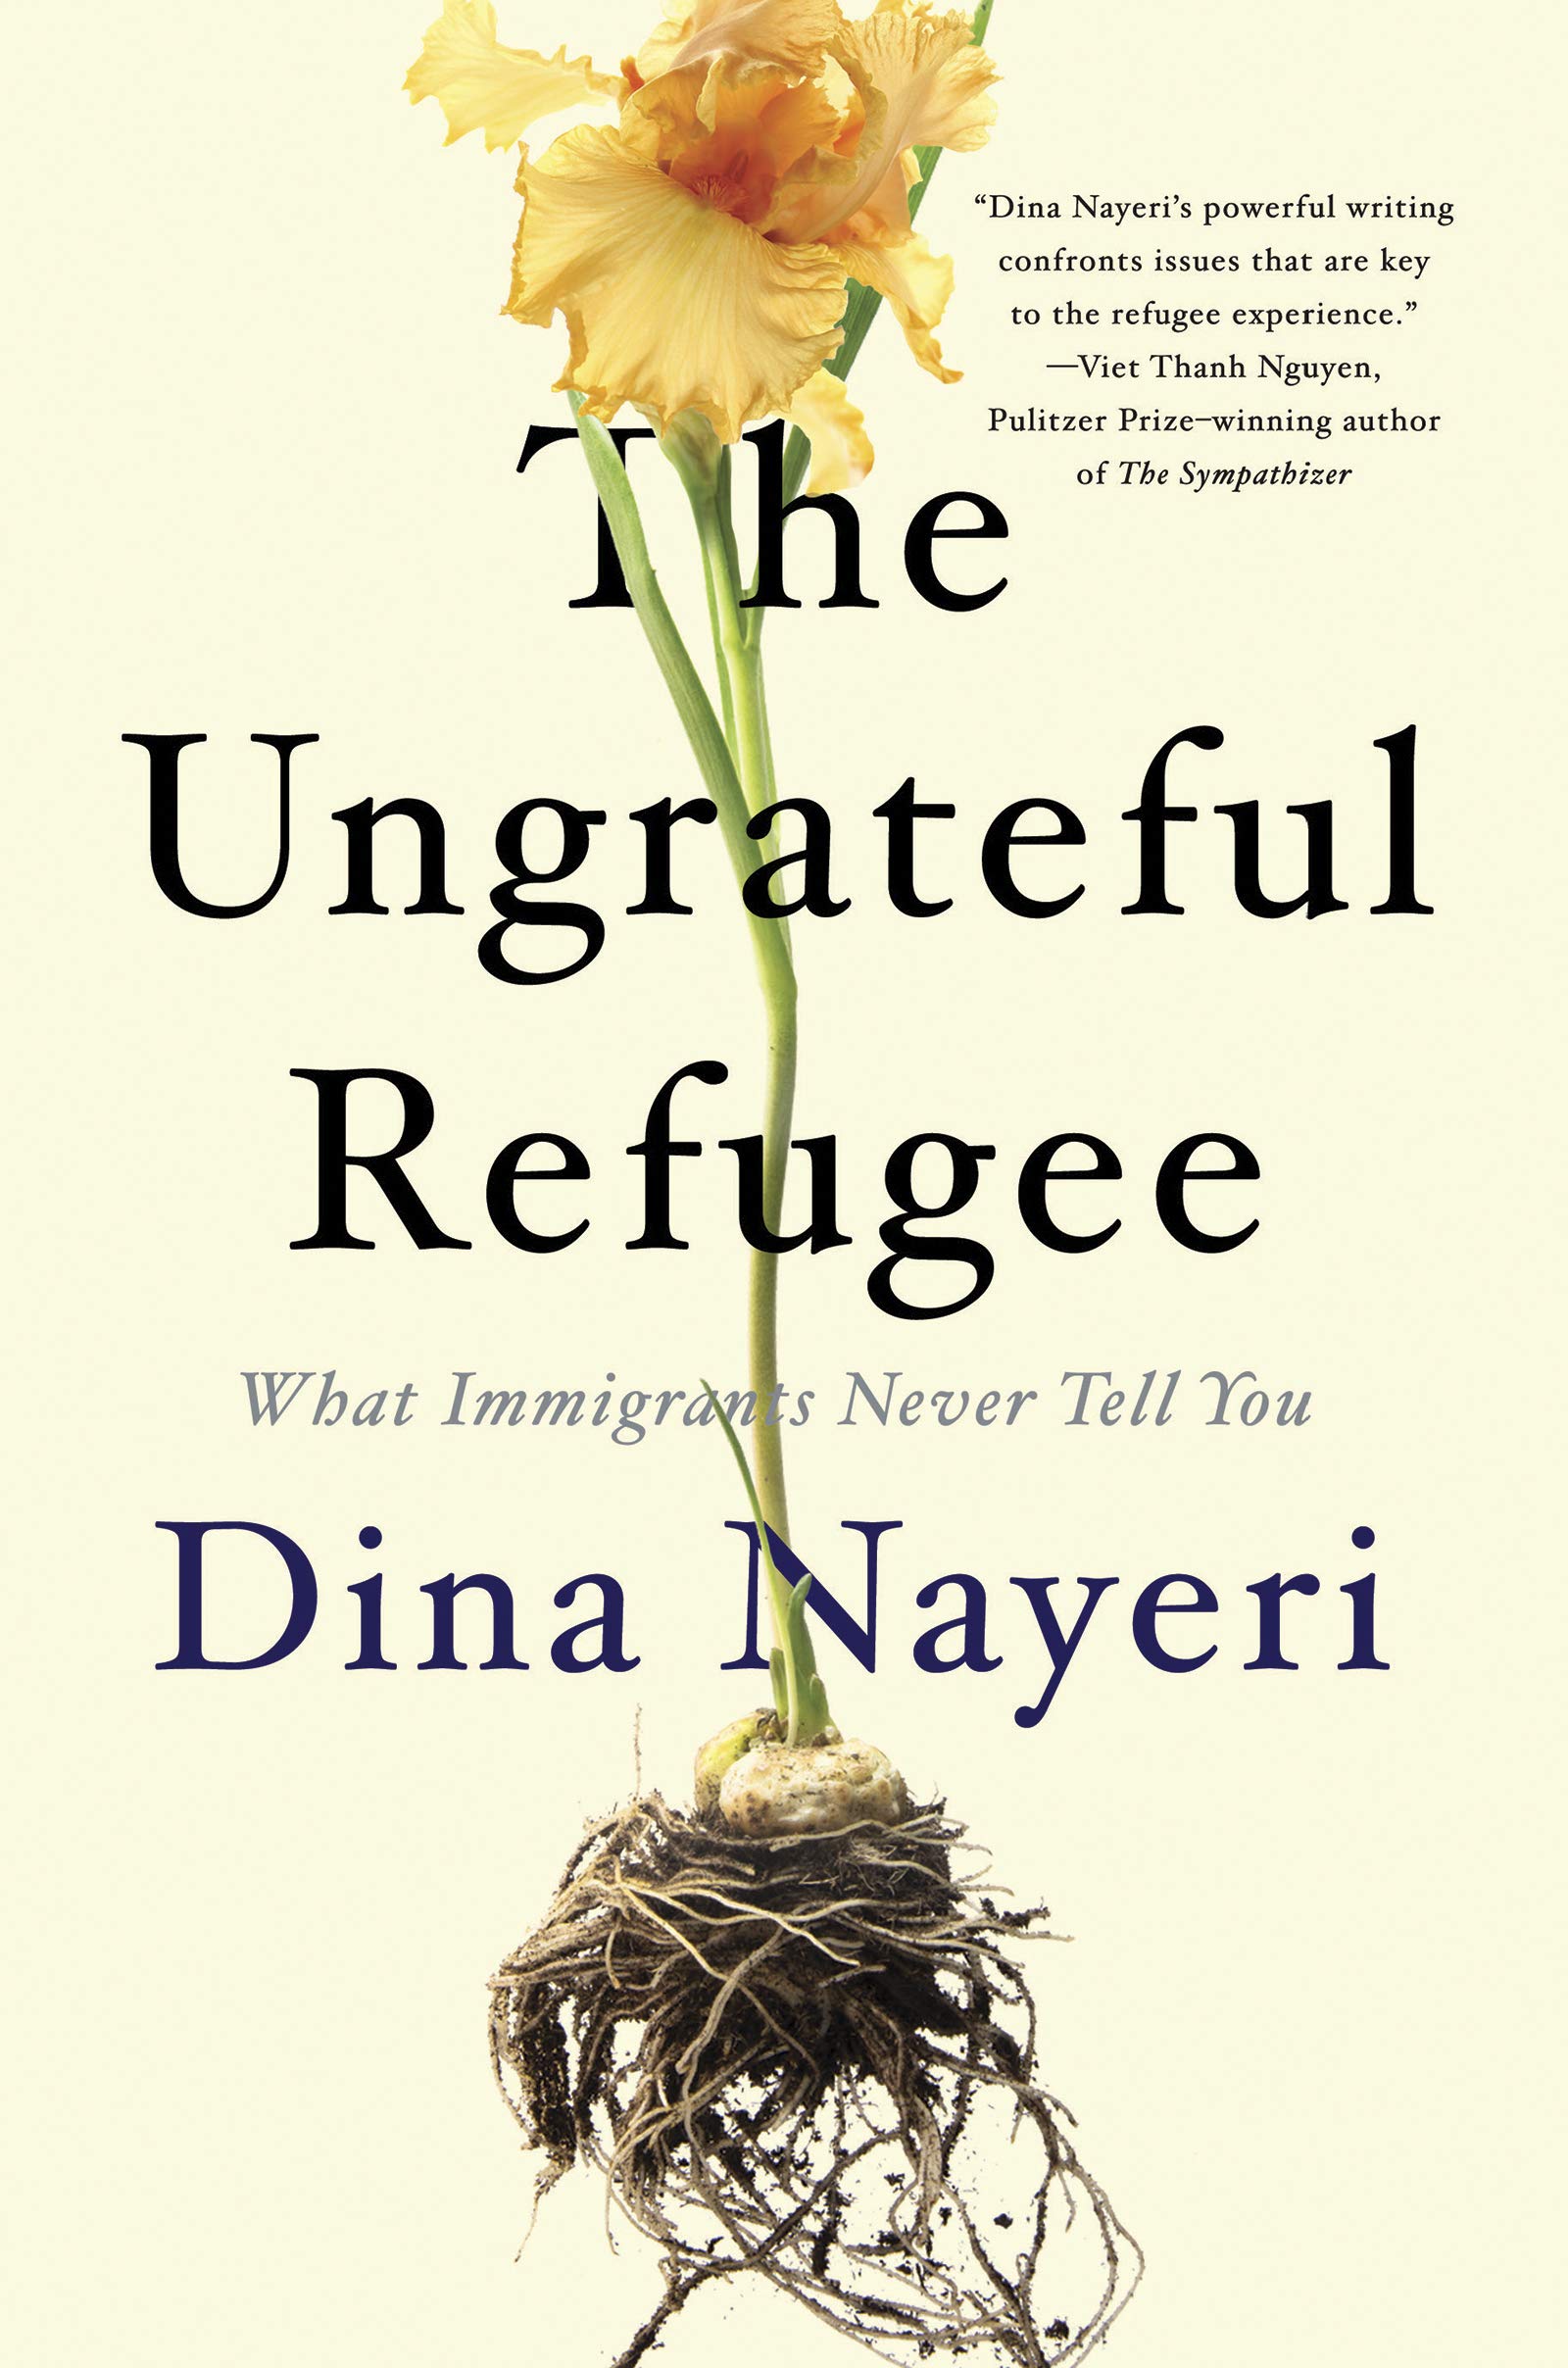 Cover of Dina Nayeri’s "The Ungrateful Refugee" (published by Catapult)